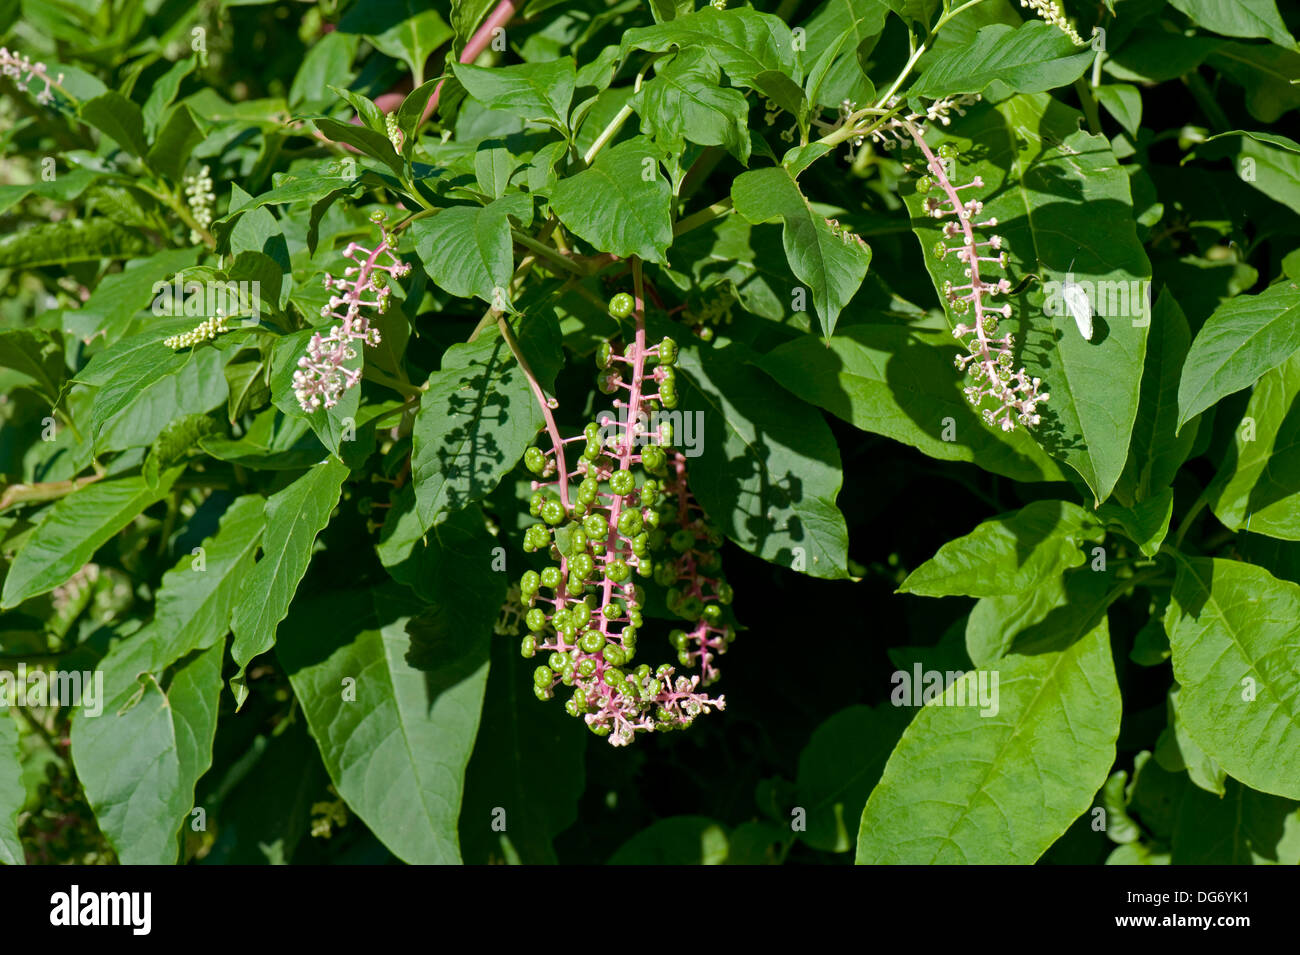 American pokeweed, Phytolacca americana, flowering and seeding plant Stock Photo